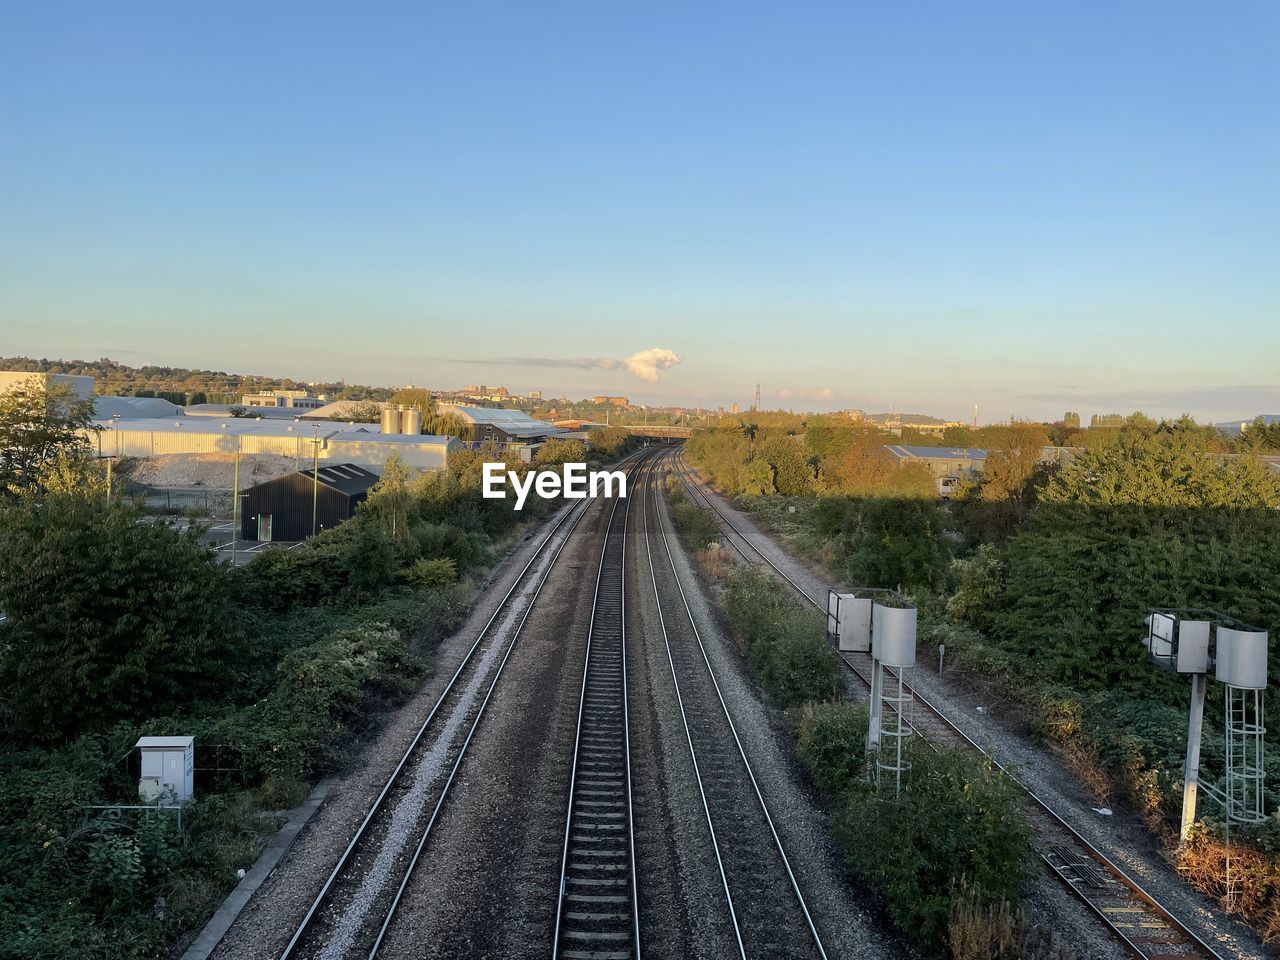 HIGH ANGLE VIEW OF RAILROAD TRACK AGAINST CLEAR SKY